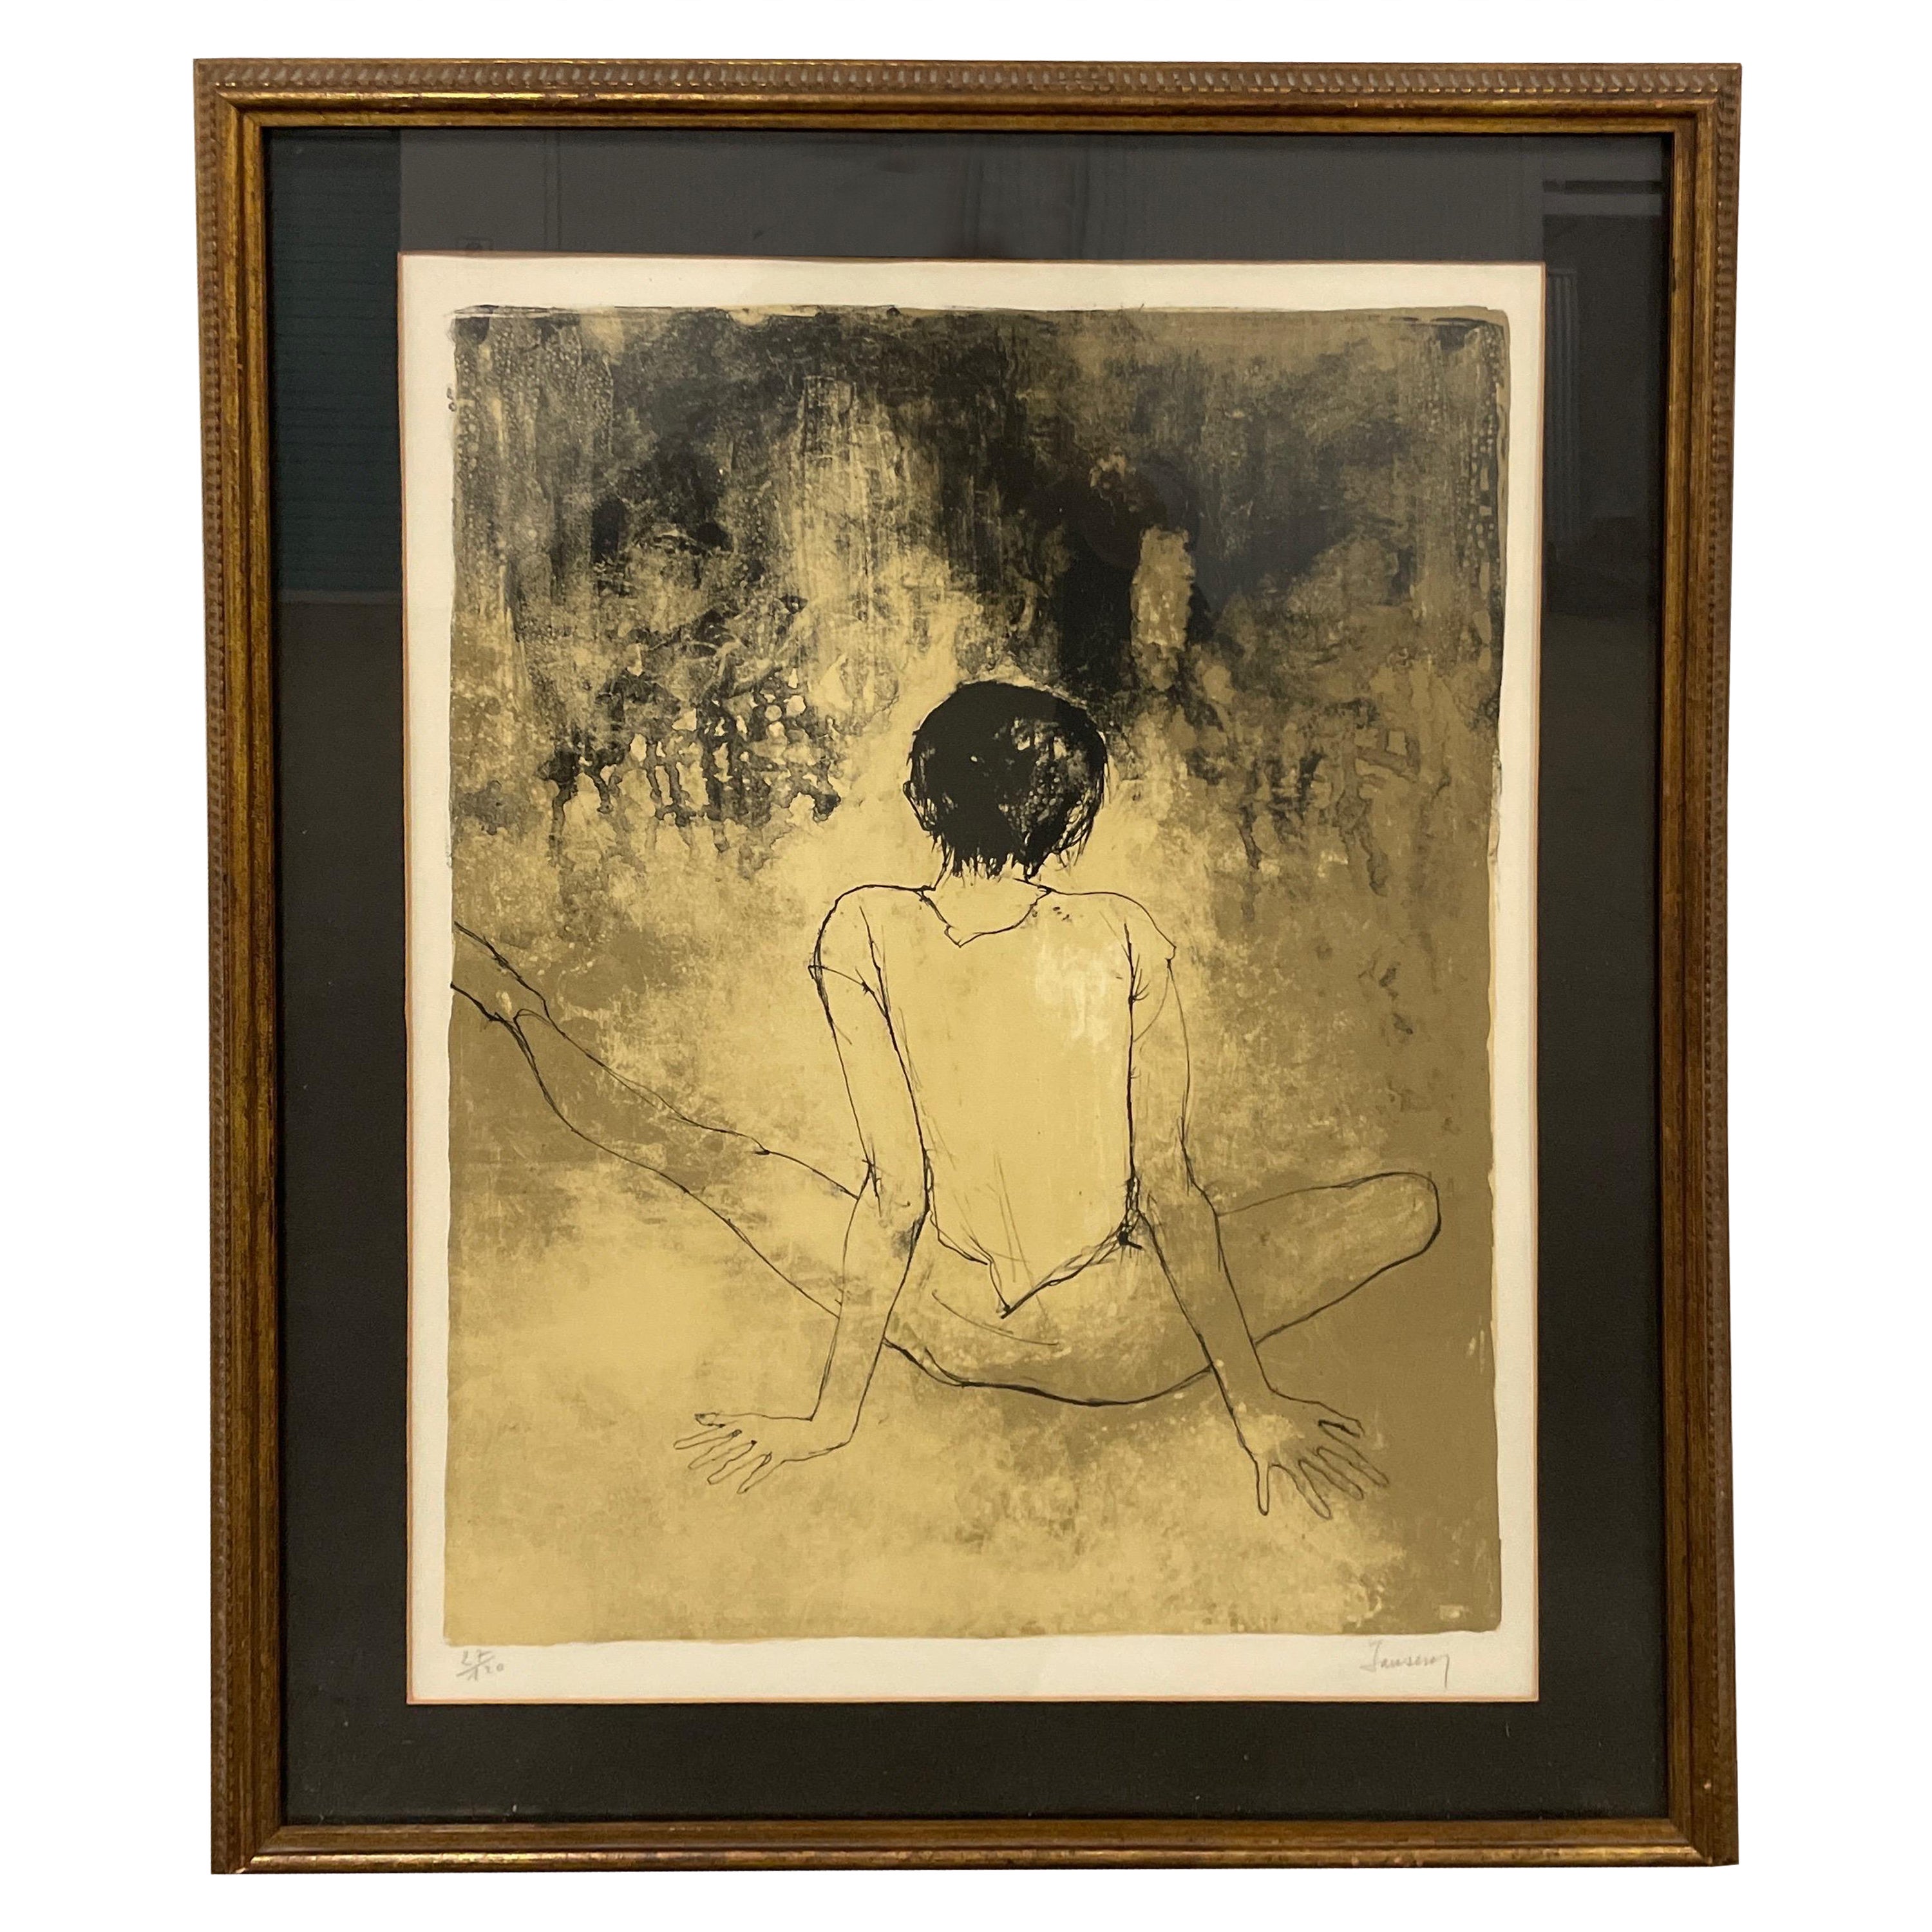 Limited Edition Lithograph of Ballerina by Jean Jansem